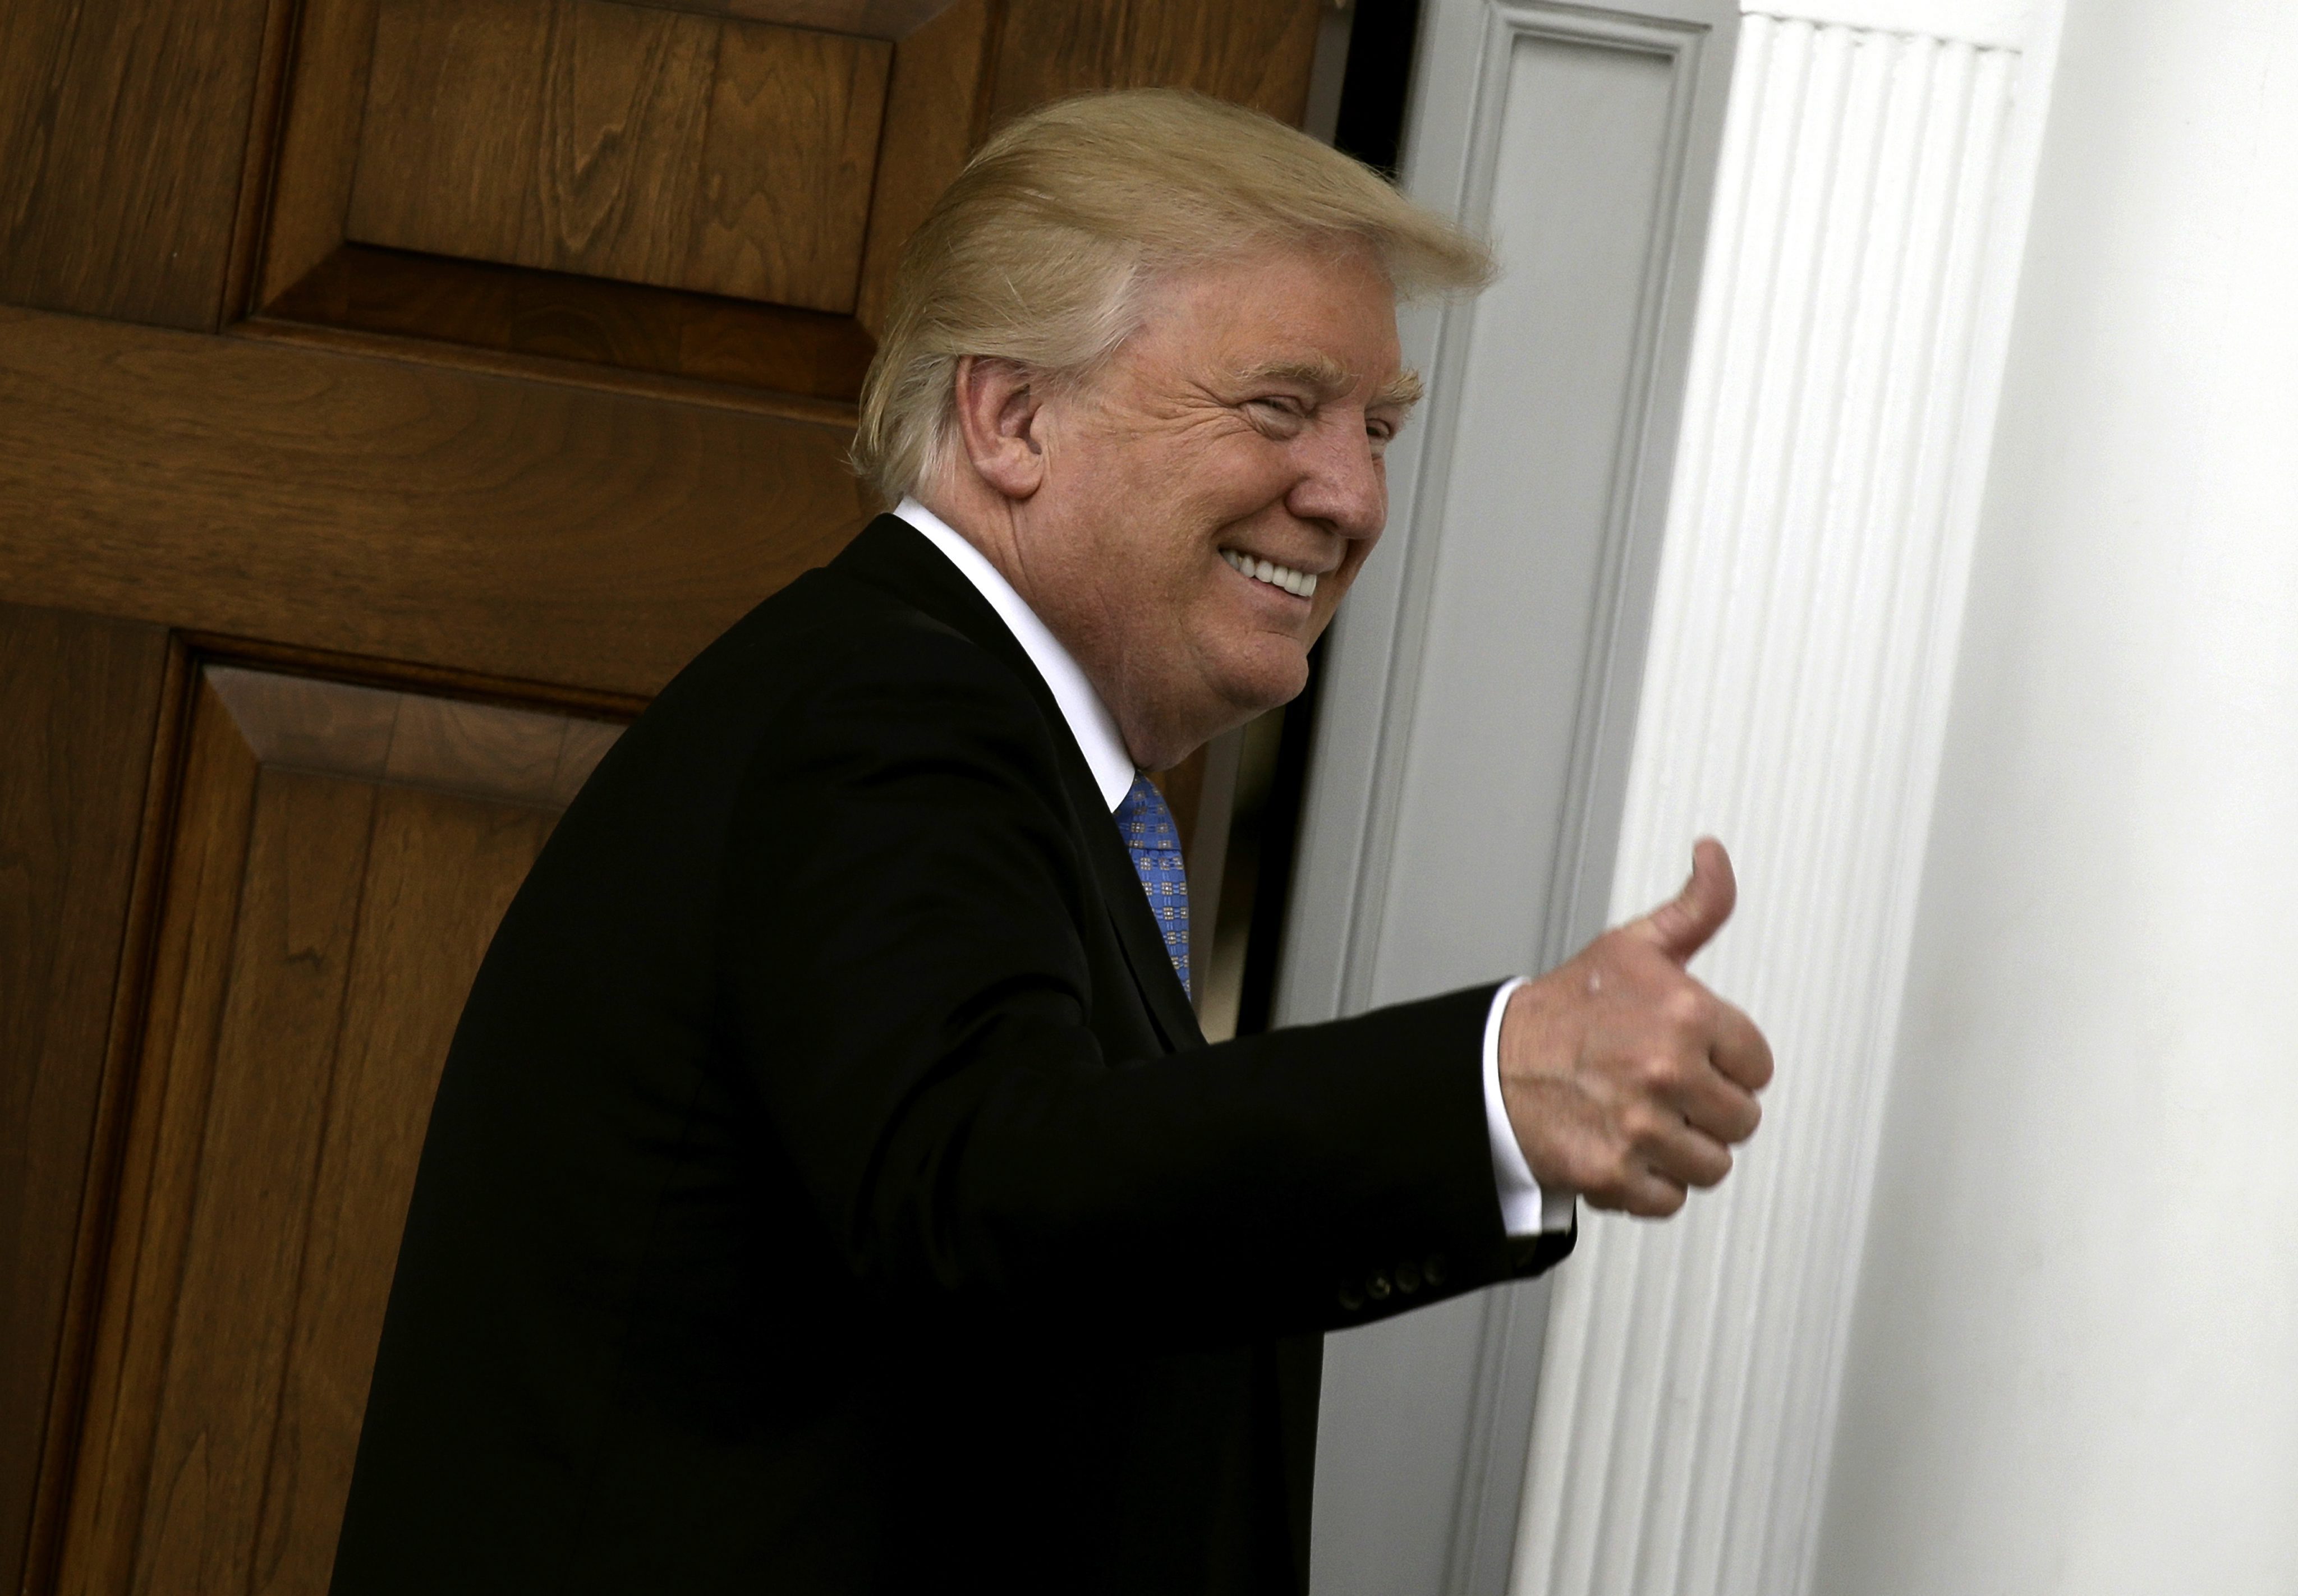 2016-11-20 15:14:45 epa05640170 US President-elect Donald Trump gestures a thumbs up at the clubhouse of Trump International Golf Club, in Bedminster Township, New Jersey, USA, 20 November 2016. EPA/PETER FOLEY